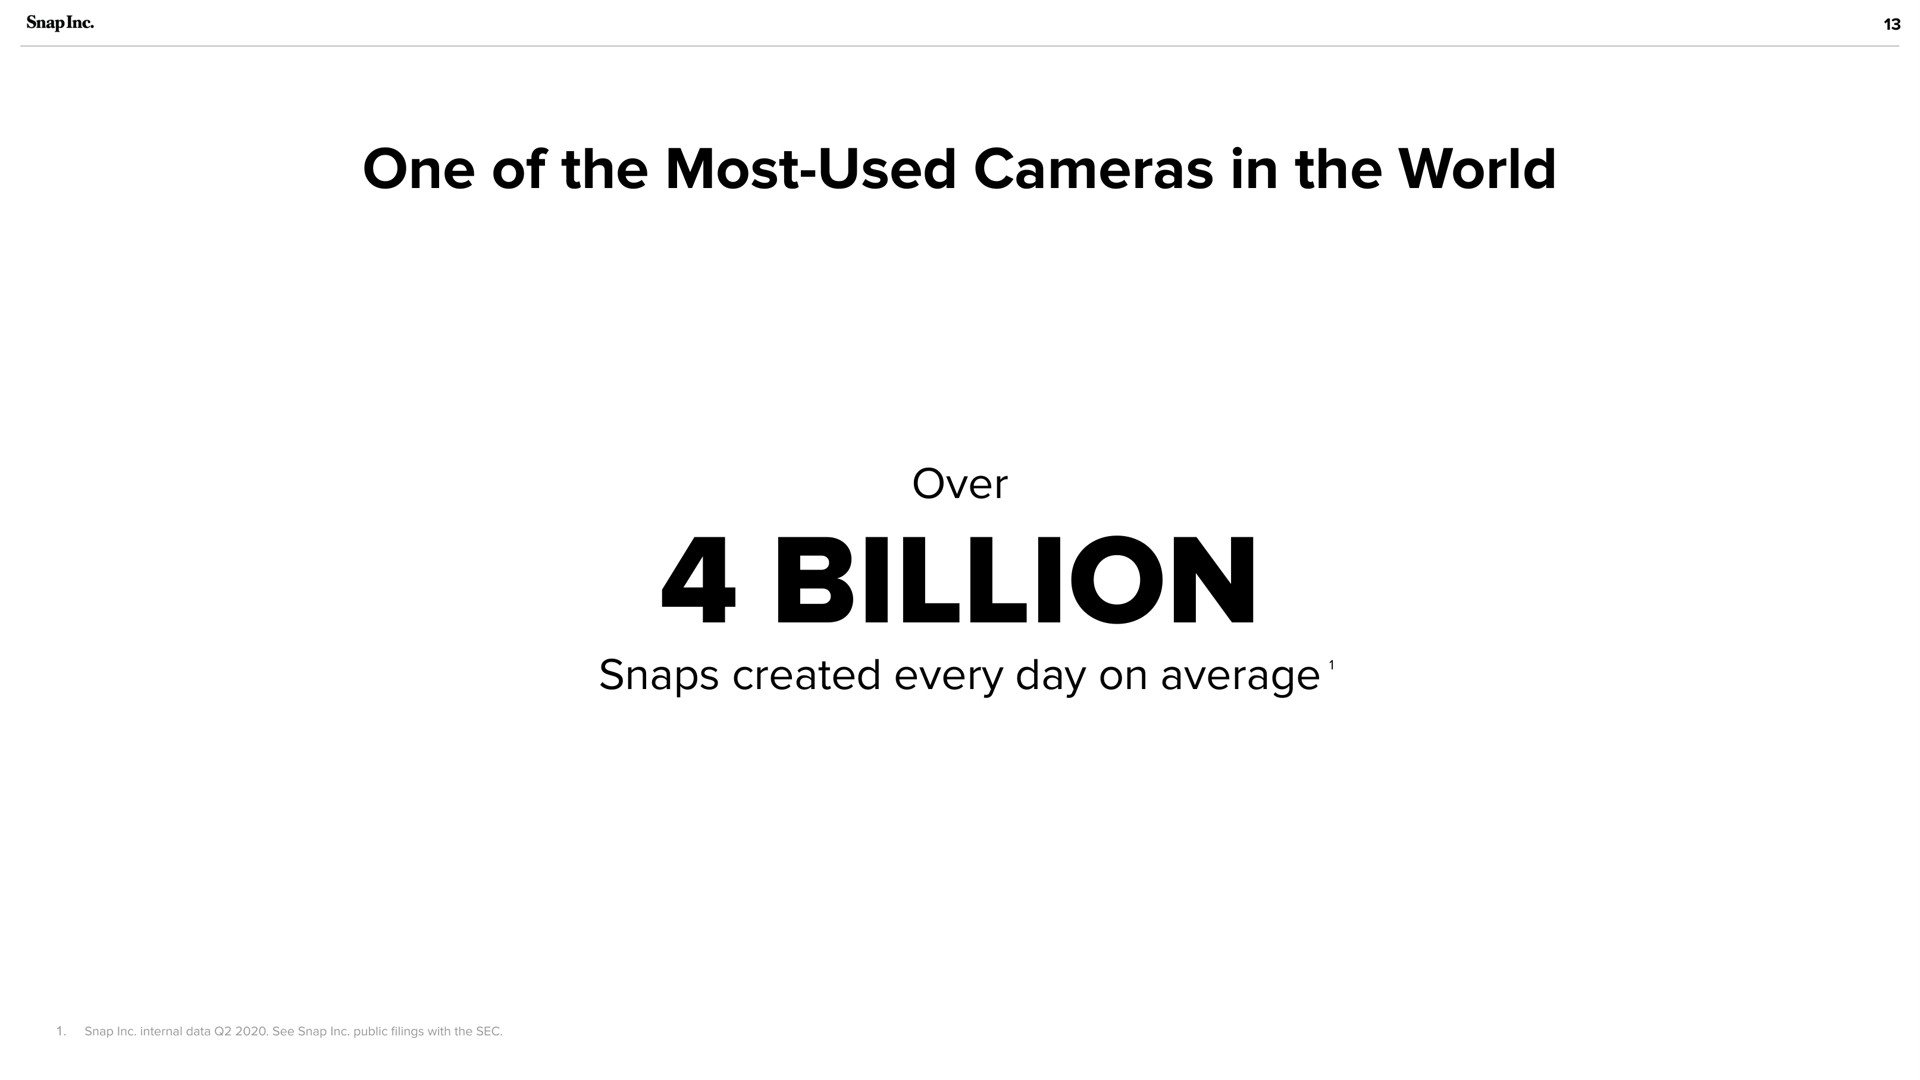 one of the most used cameras in the world billion snaps created every day on average | Snap Inc